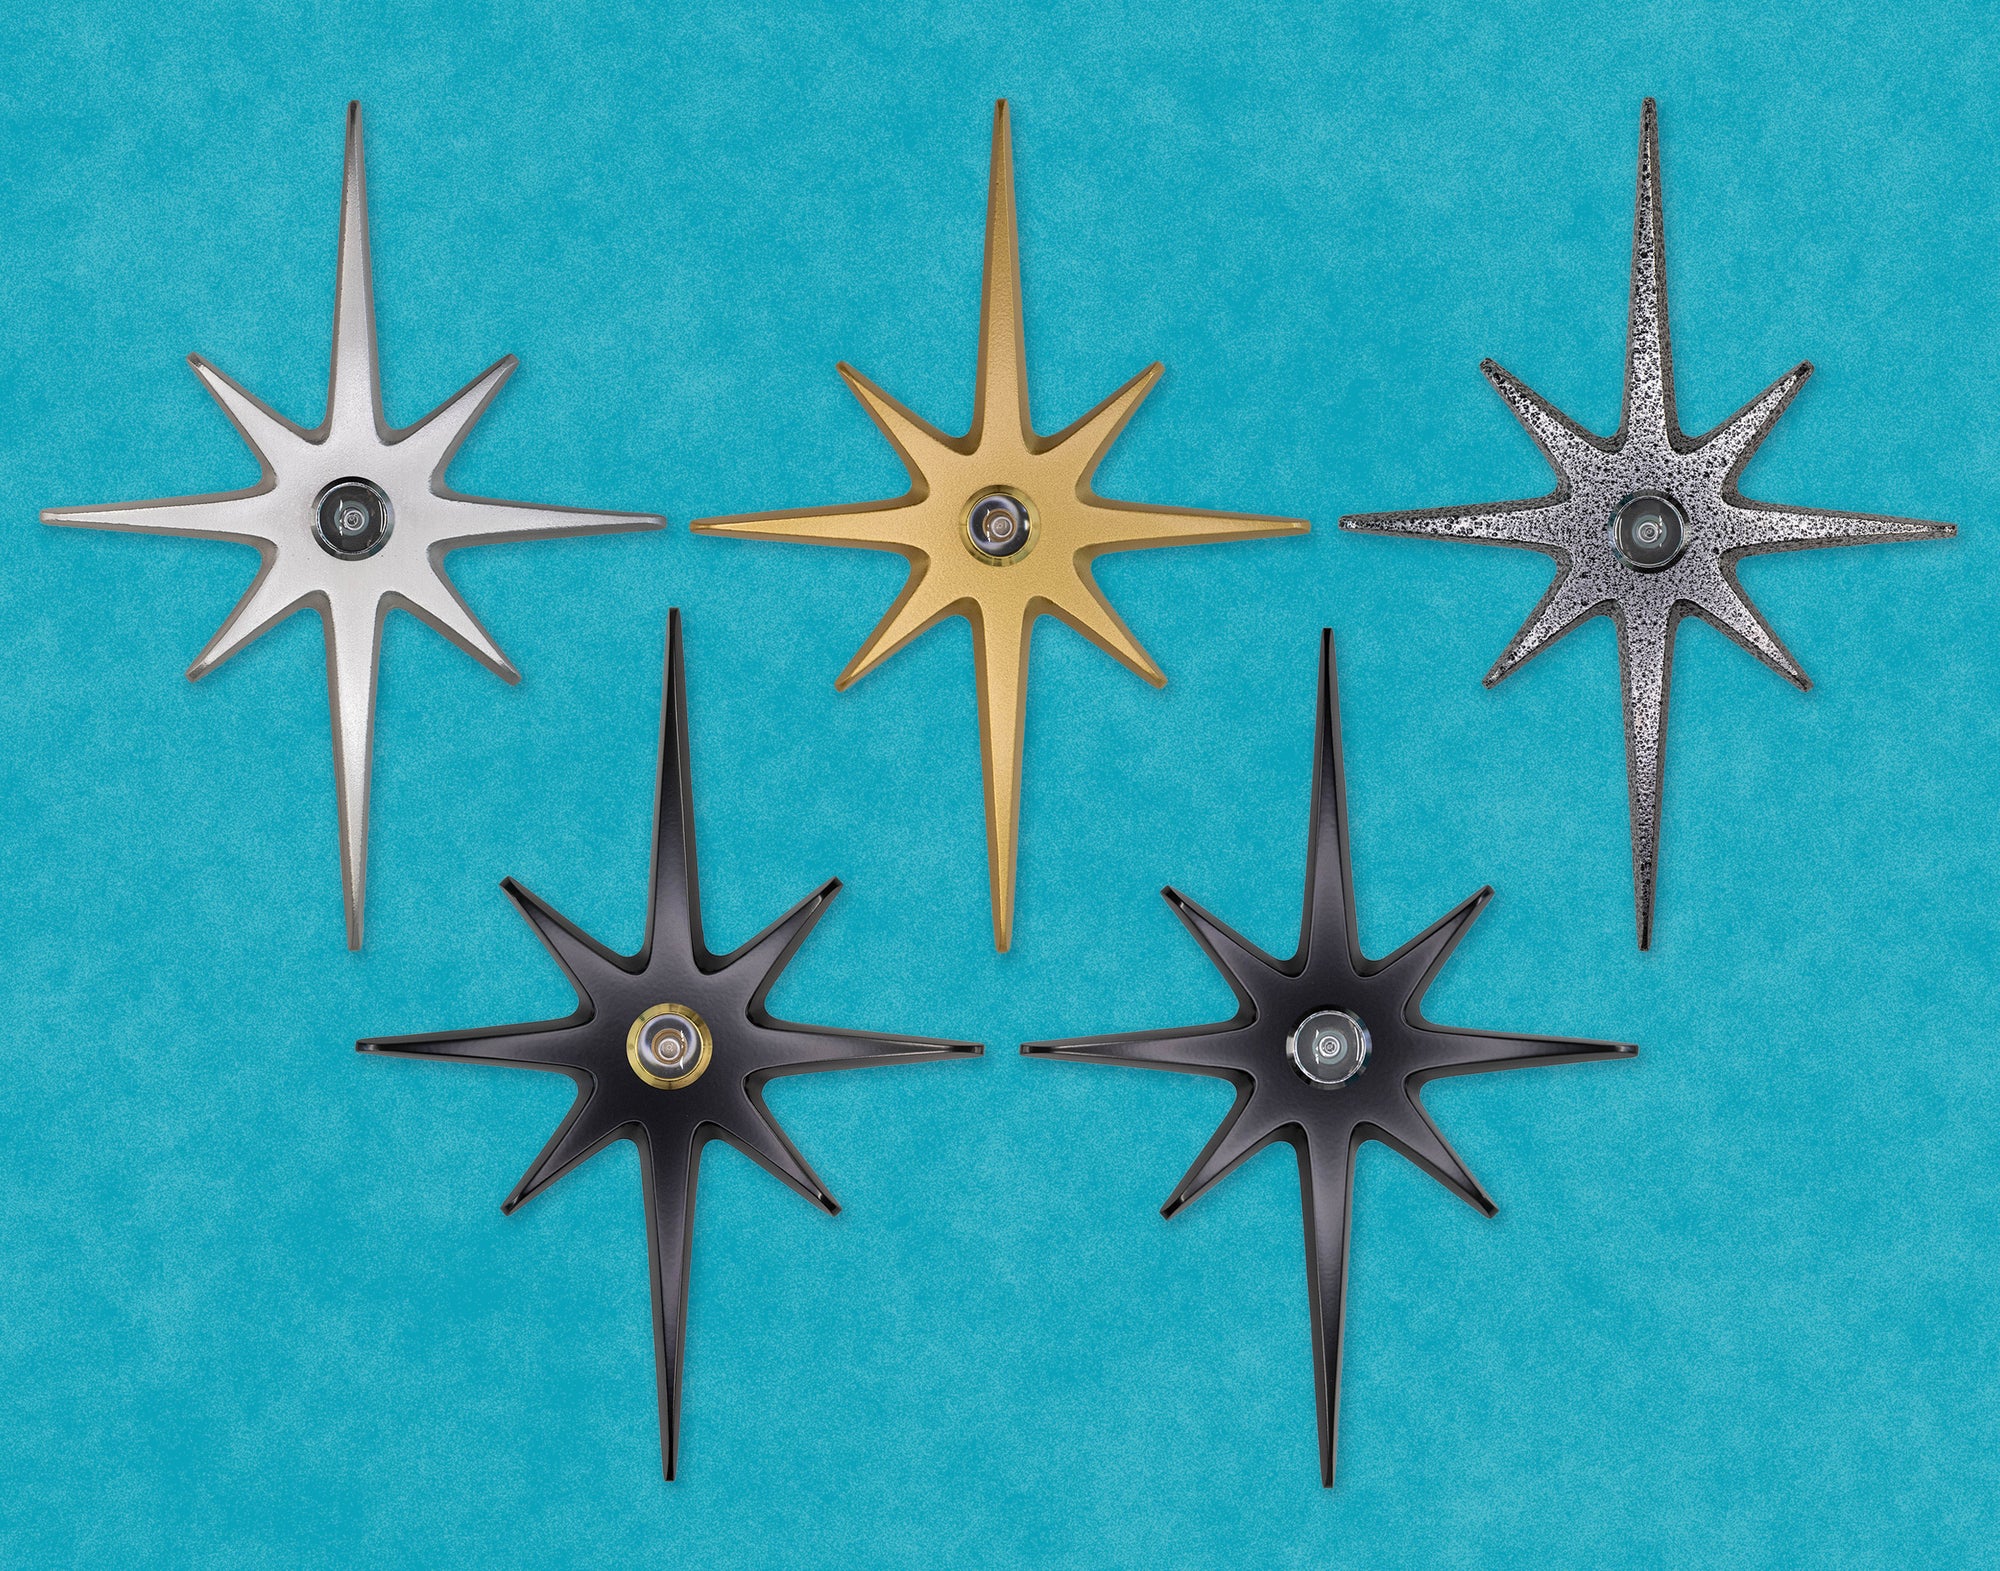 A group photo of all 5 variations of the product: a large starburst with a peephole in the center. The colors are silver, gold, black, and black frost.